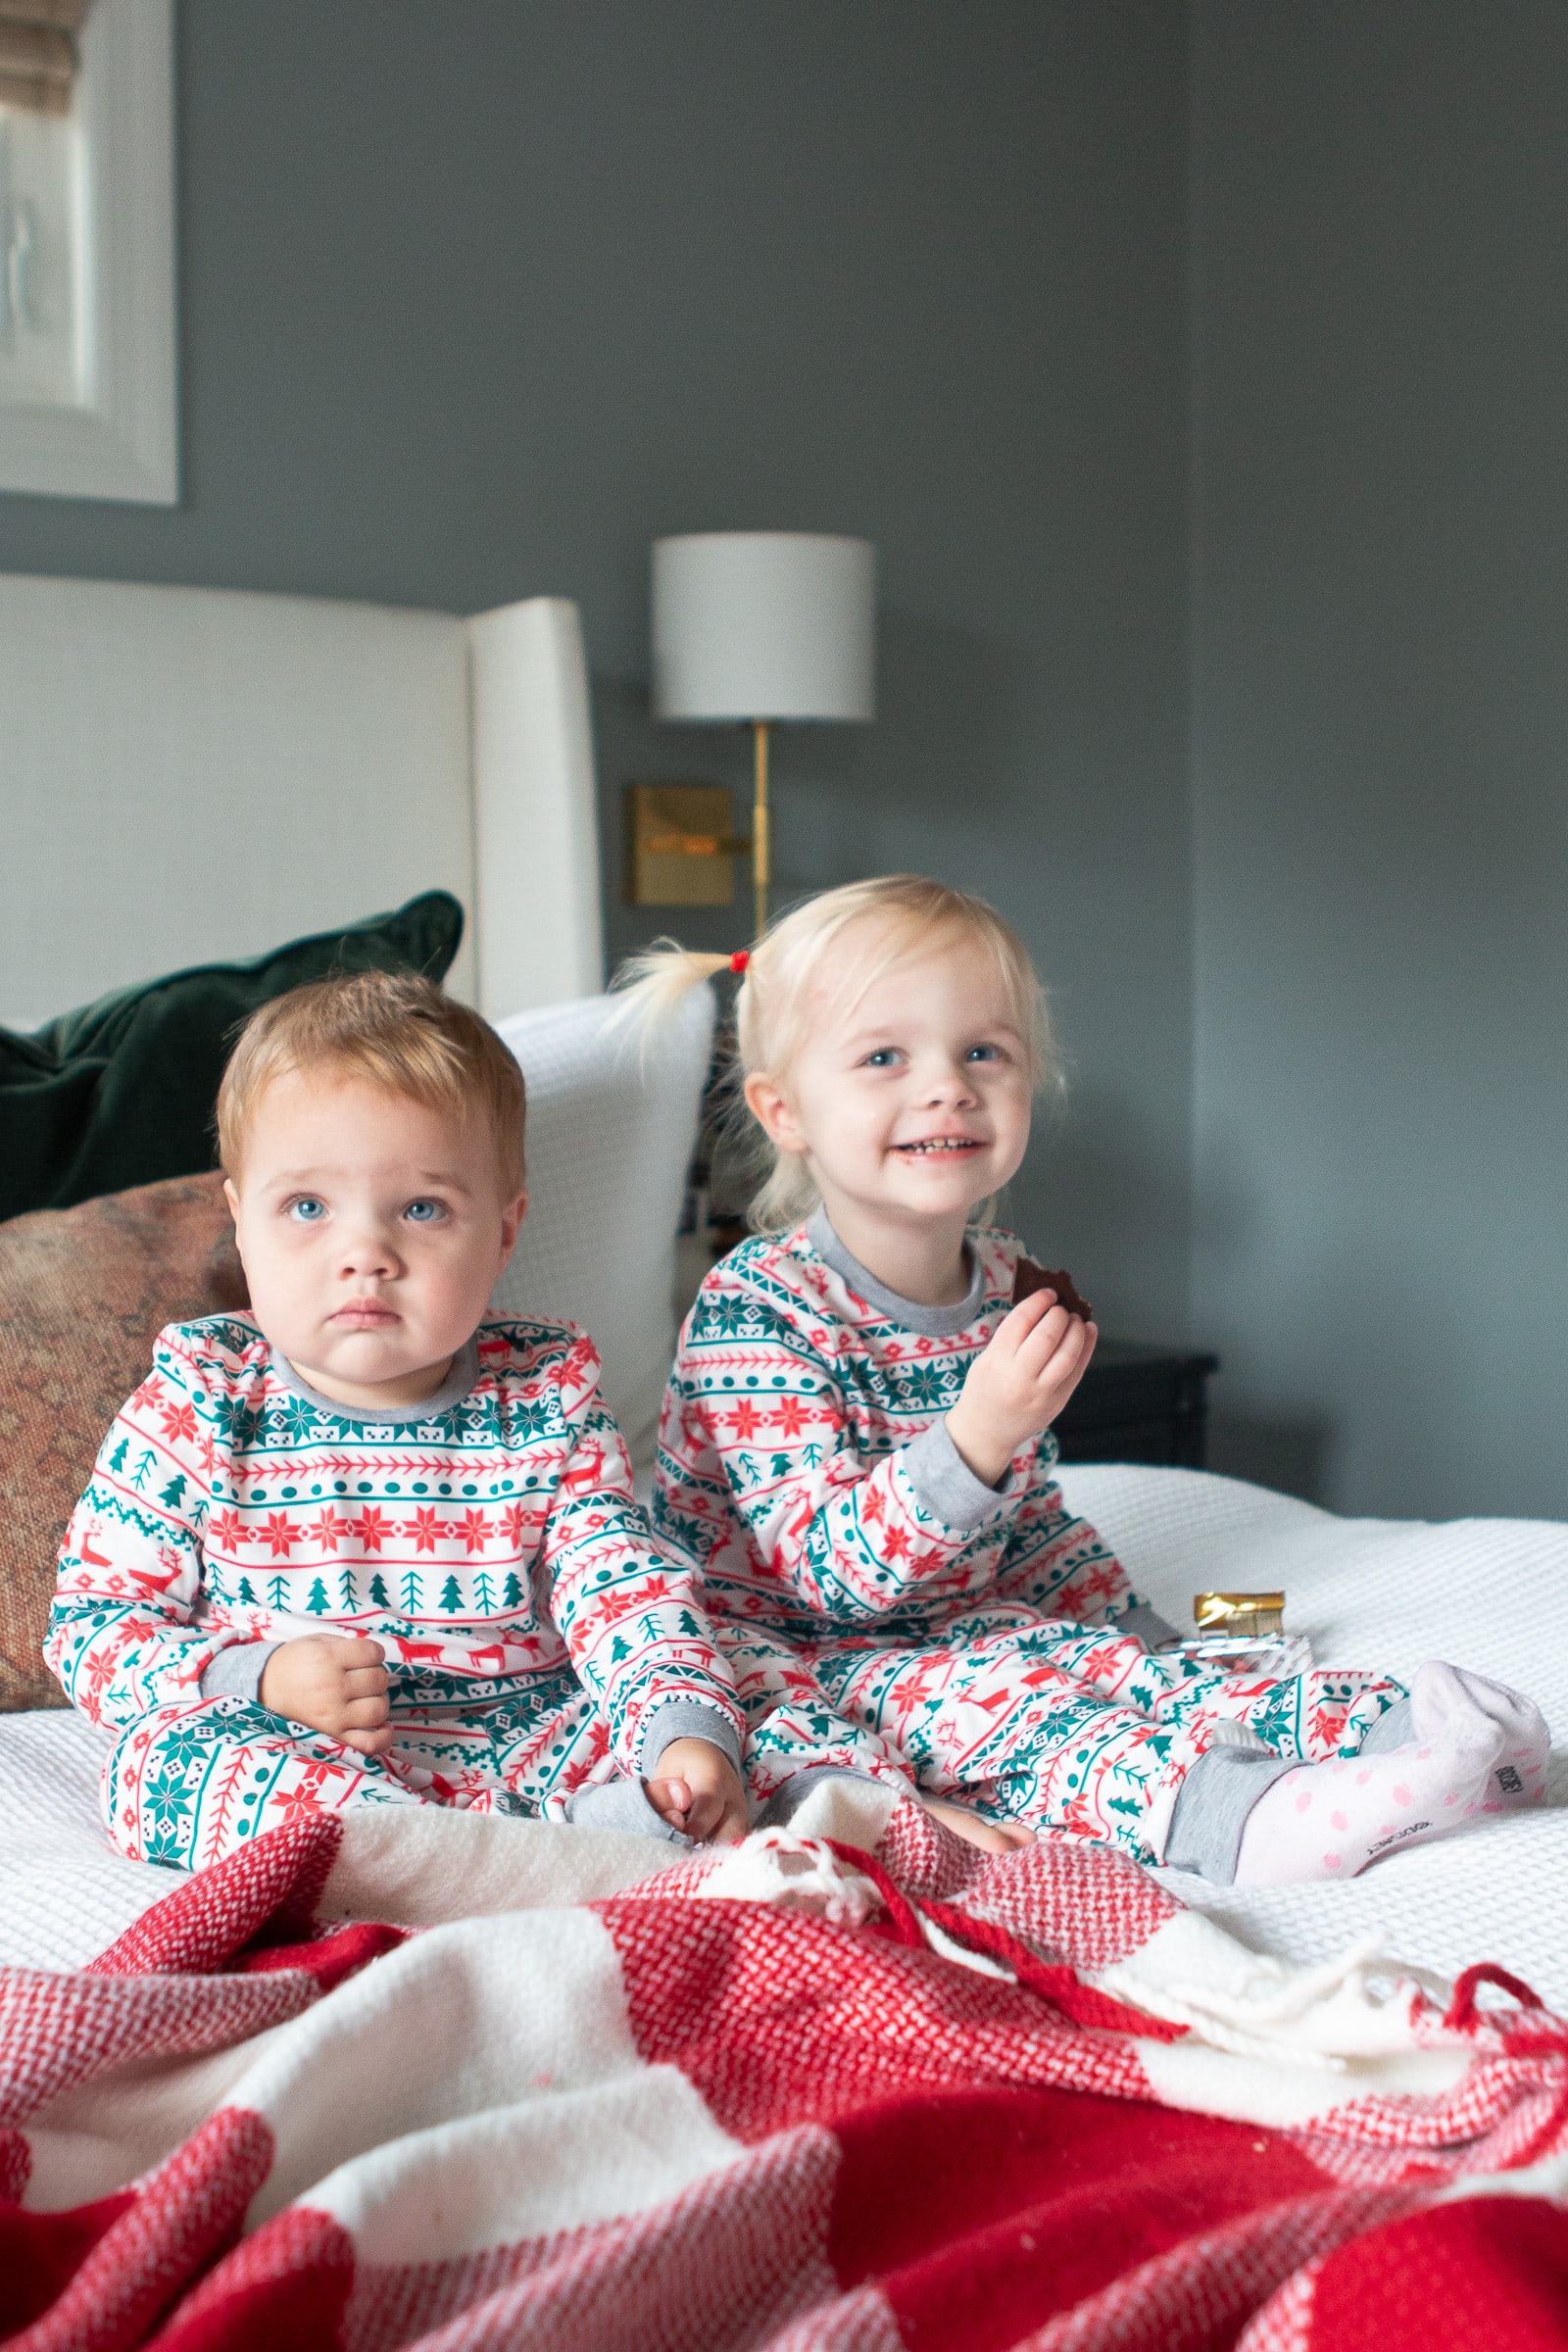 How we're creating holiday traditions as a family